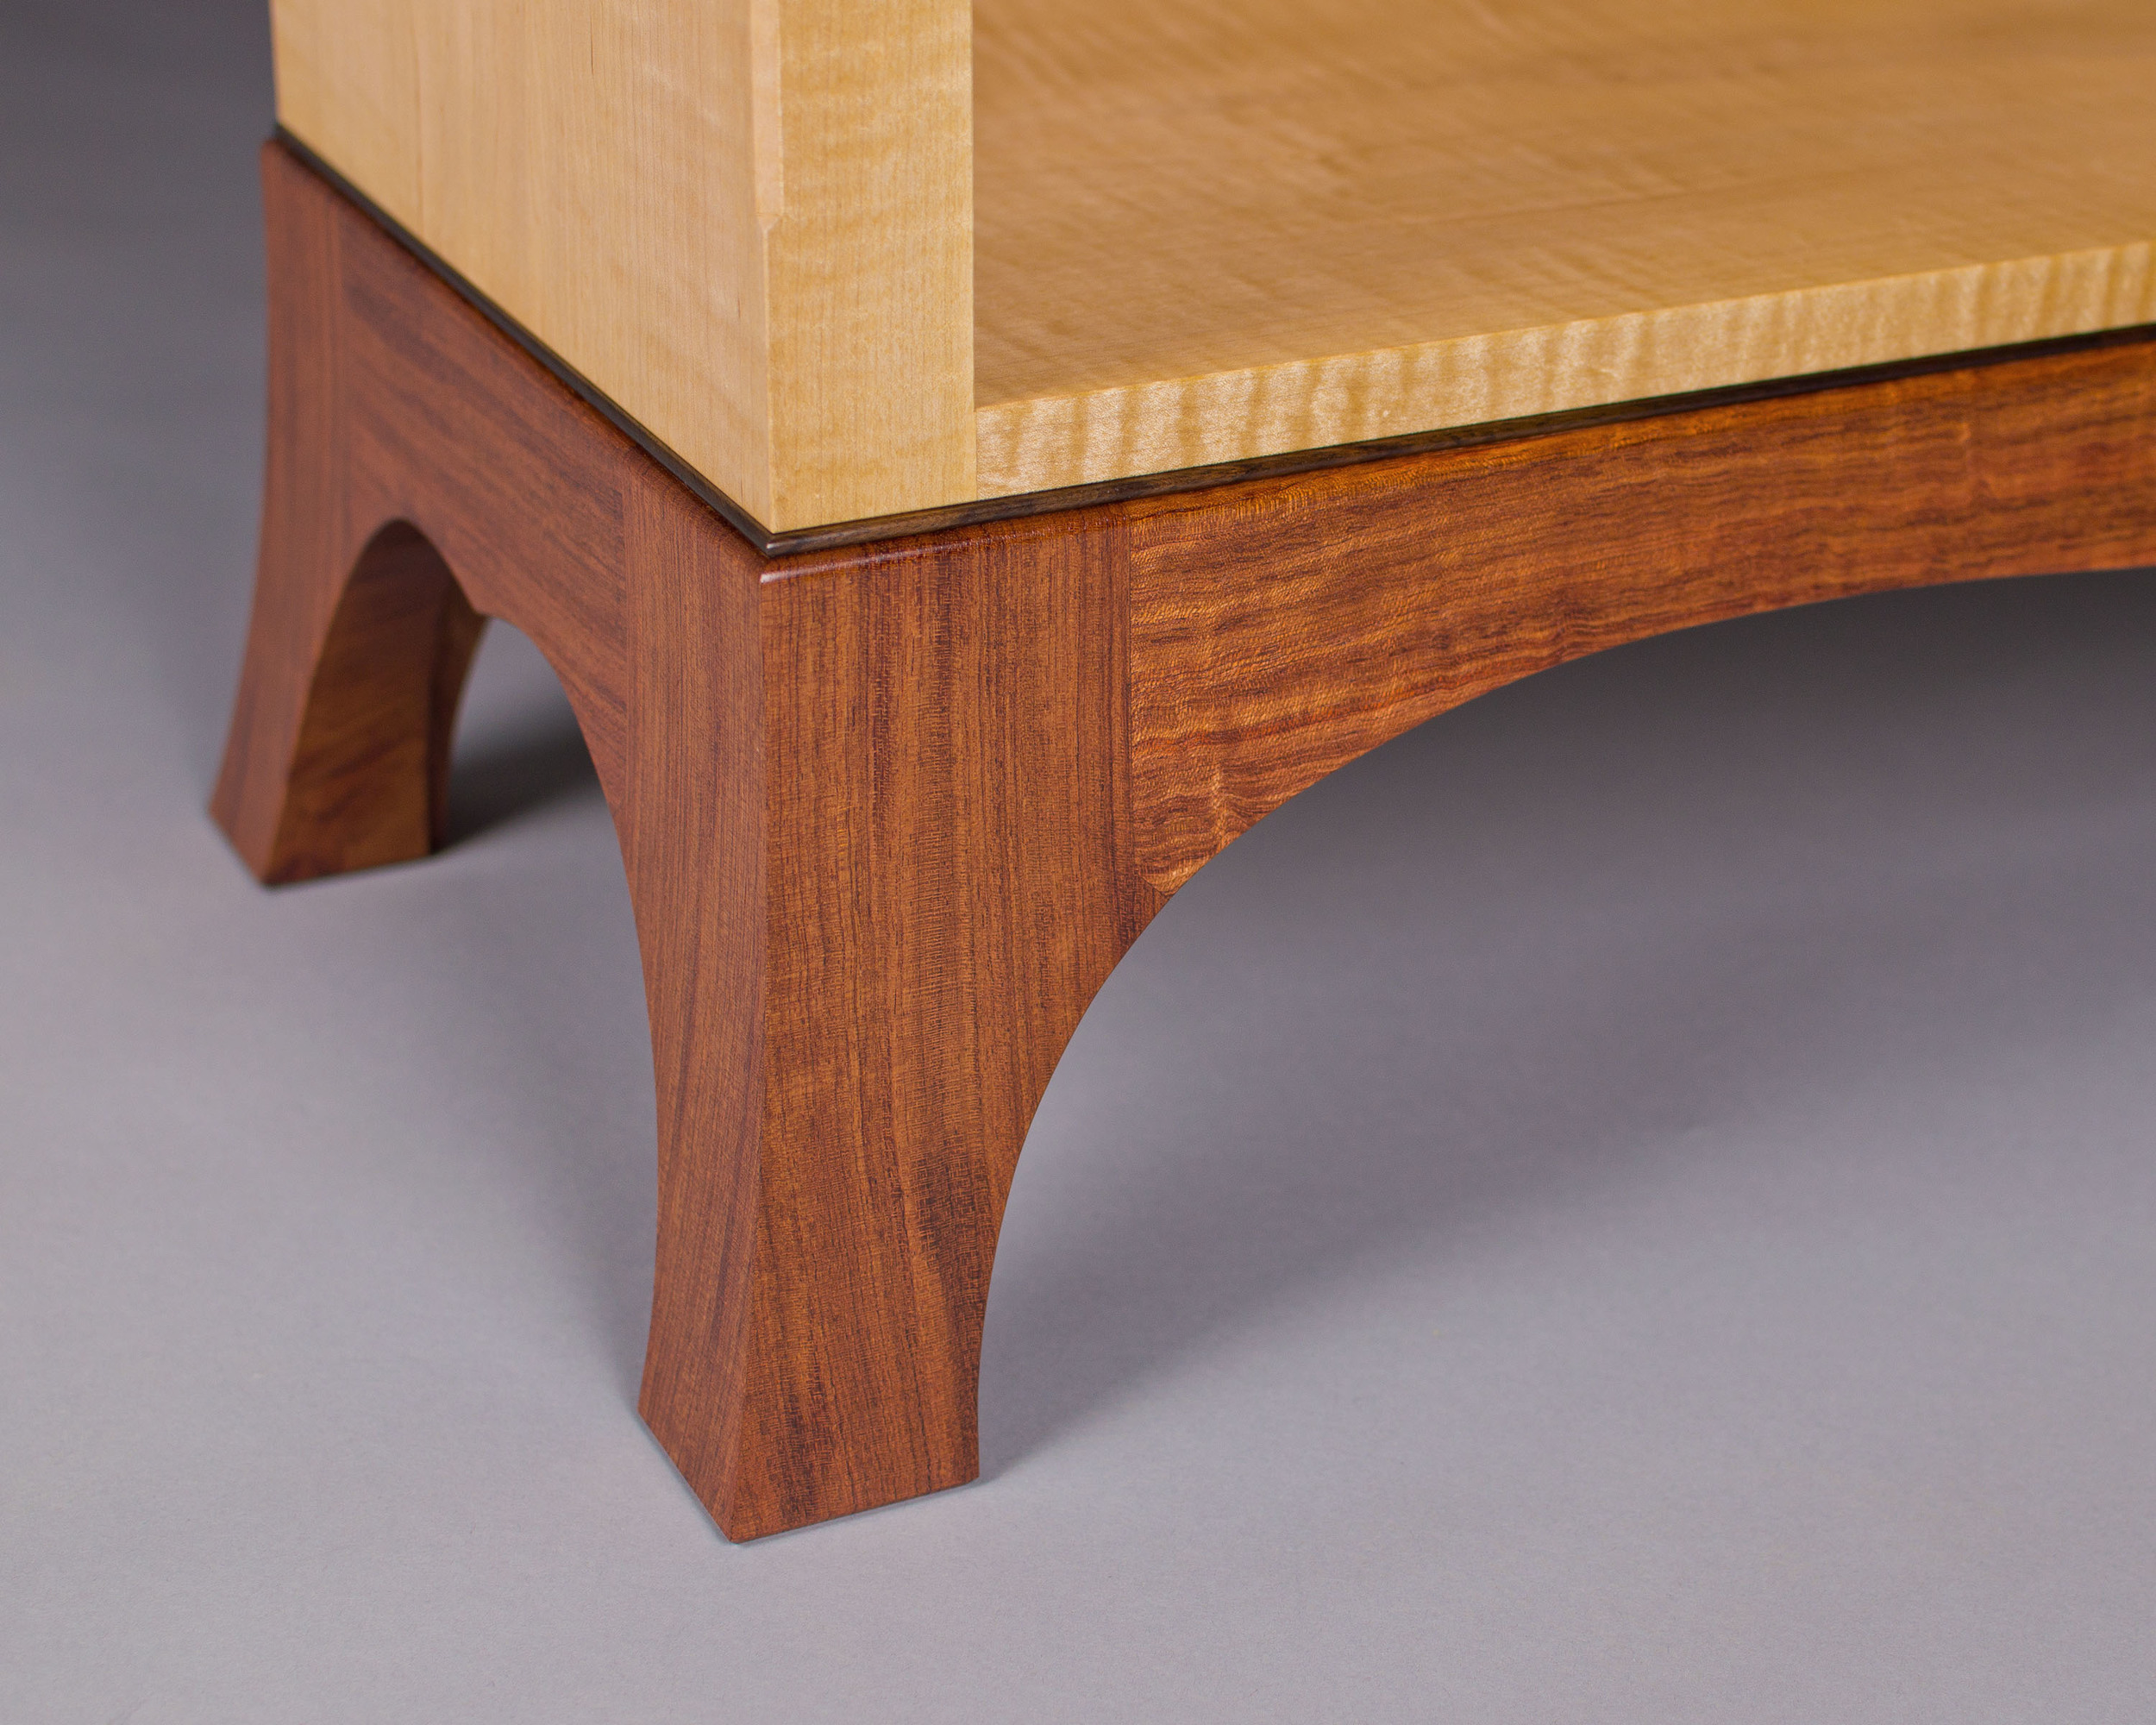 the base of the bookcase is finely detailed, with flared feet and a rosewood bead